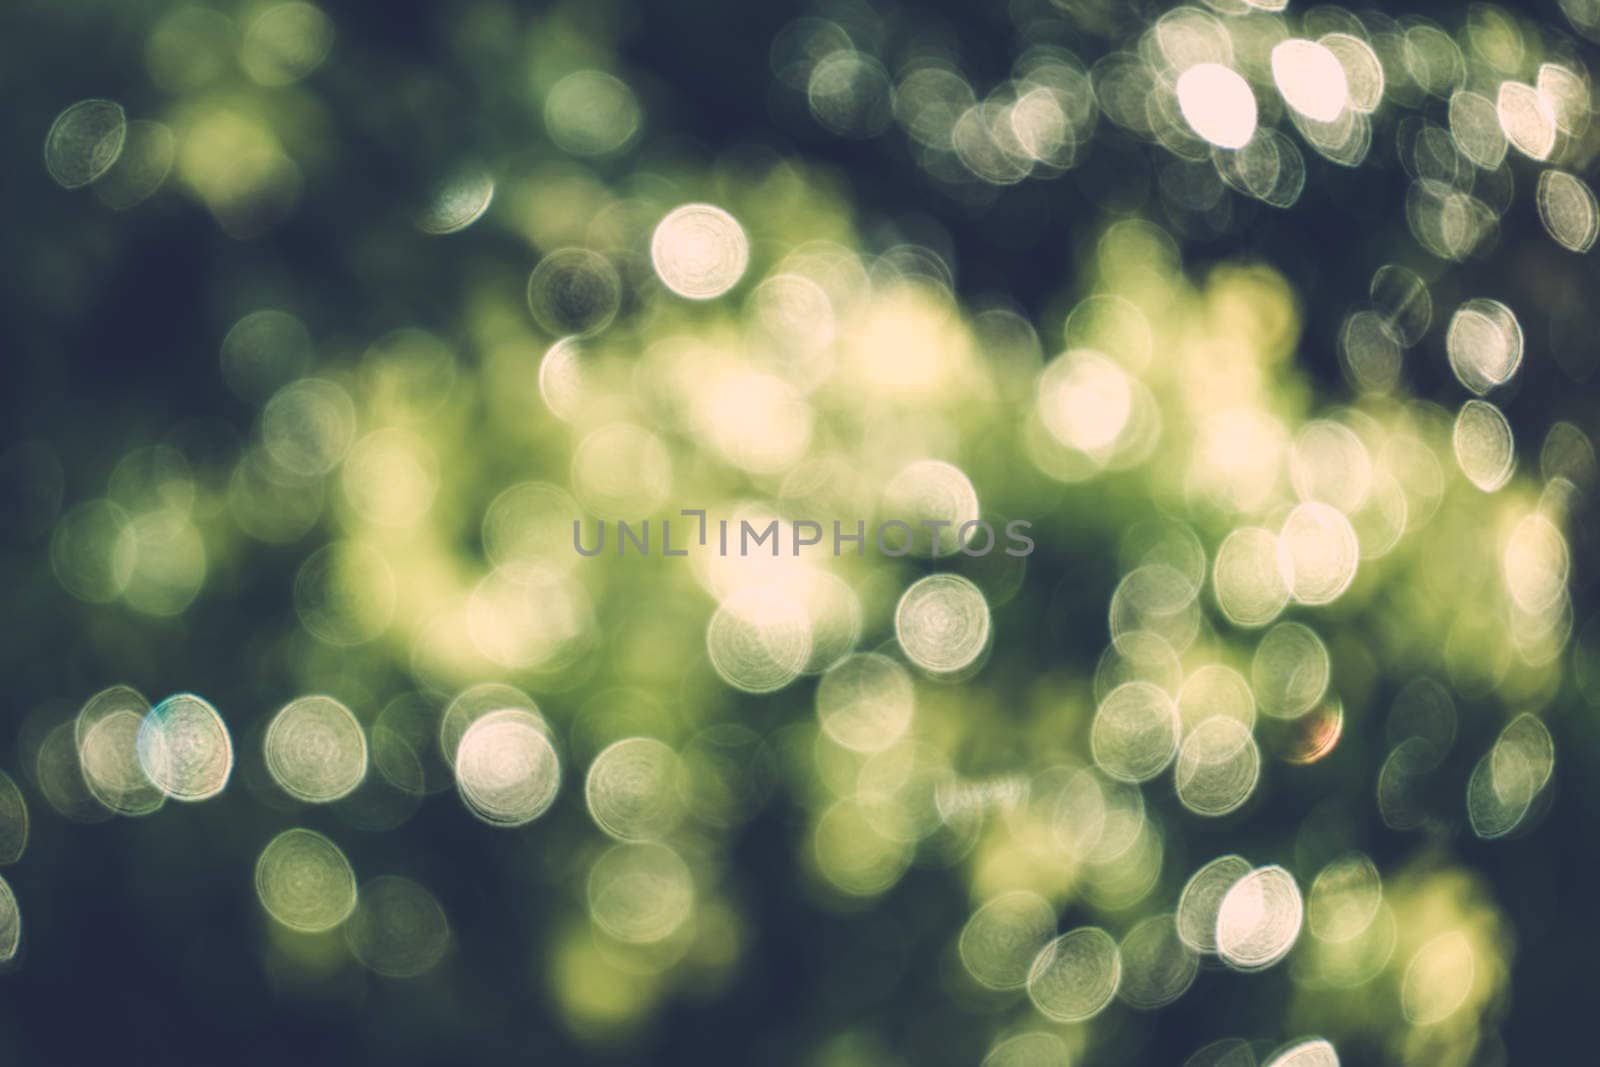 abstract natural blur background, defocused leaves, bokeh, nature background